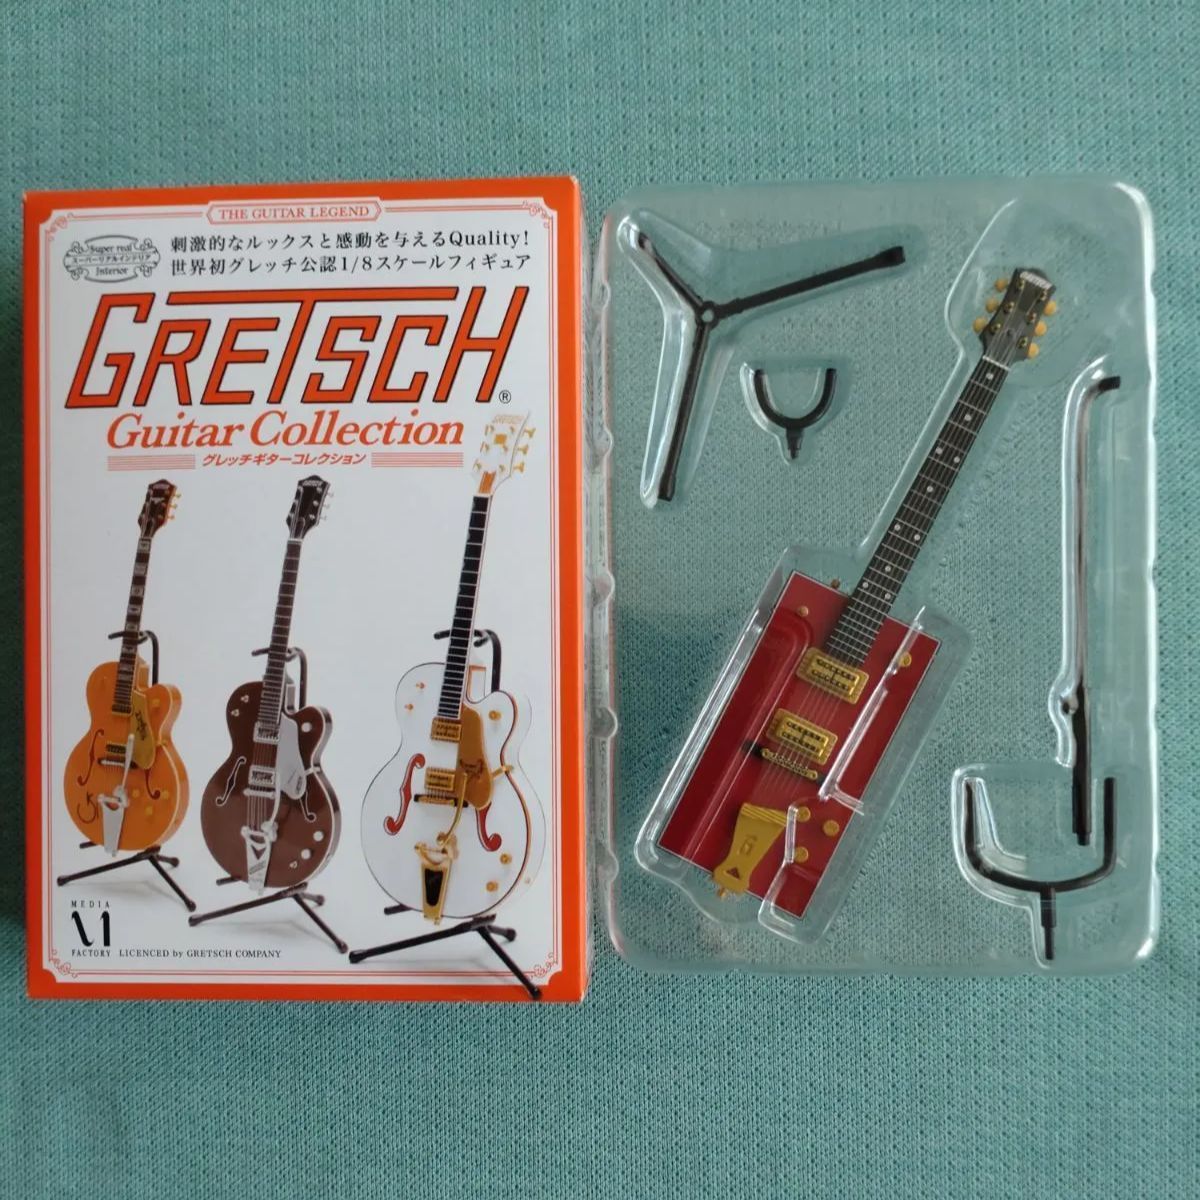 GRETSCH Guitar Collection 全7種＋シークレット！ - その他